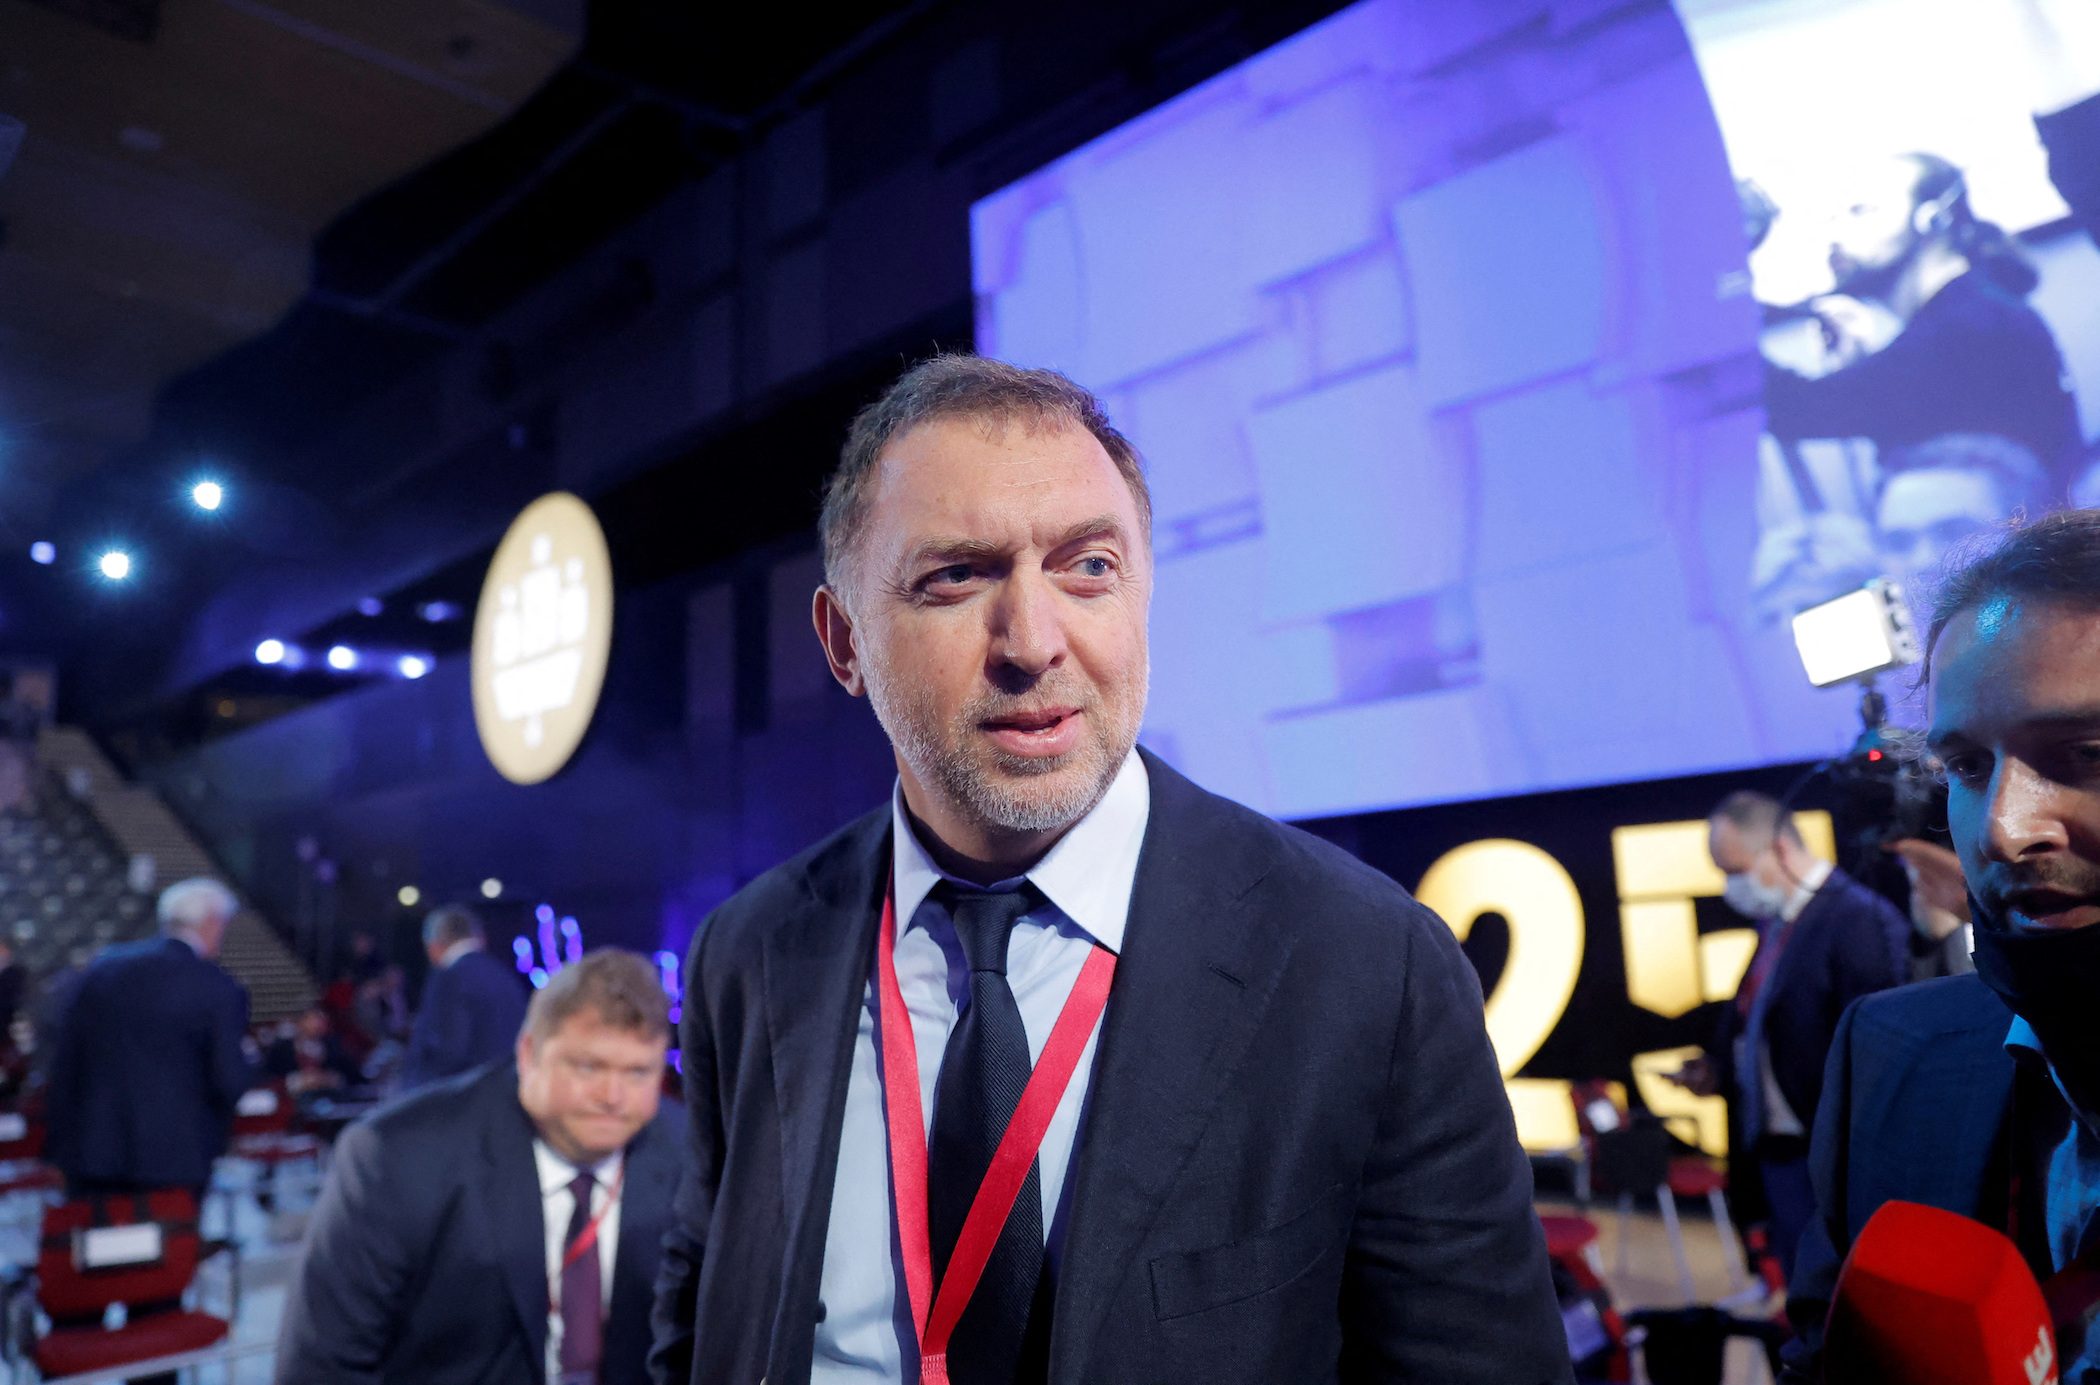 Russian tycoon Deripaska criticizes Moscow, frets about investor flight